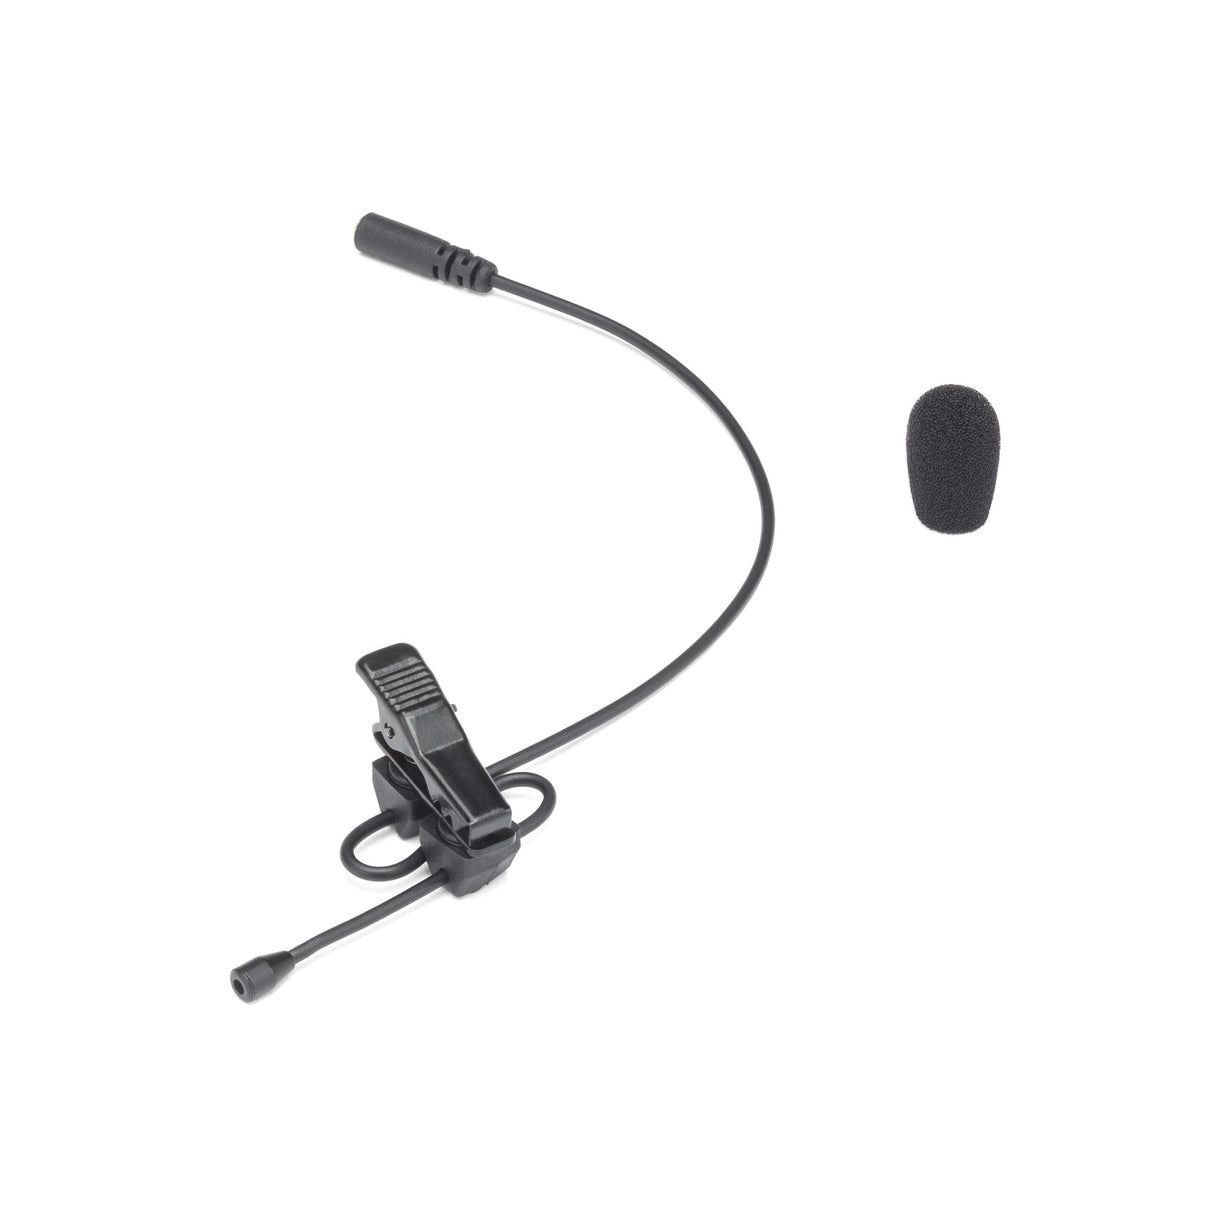 Samson Omnidirectional Lavalier Microphone with Miniature Condenser Capsule